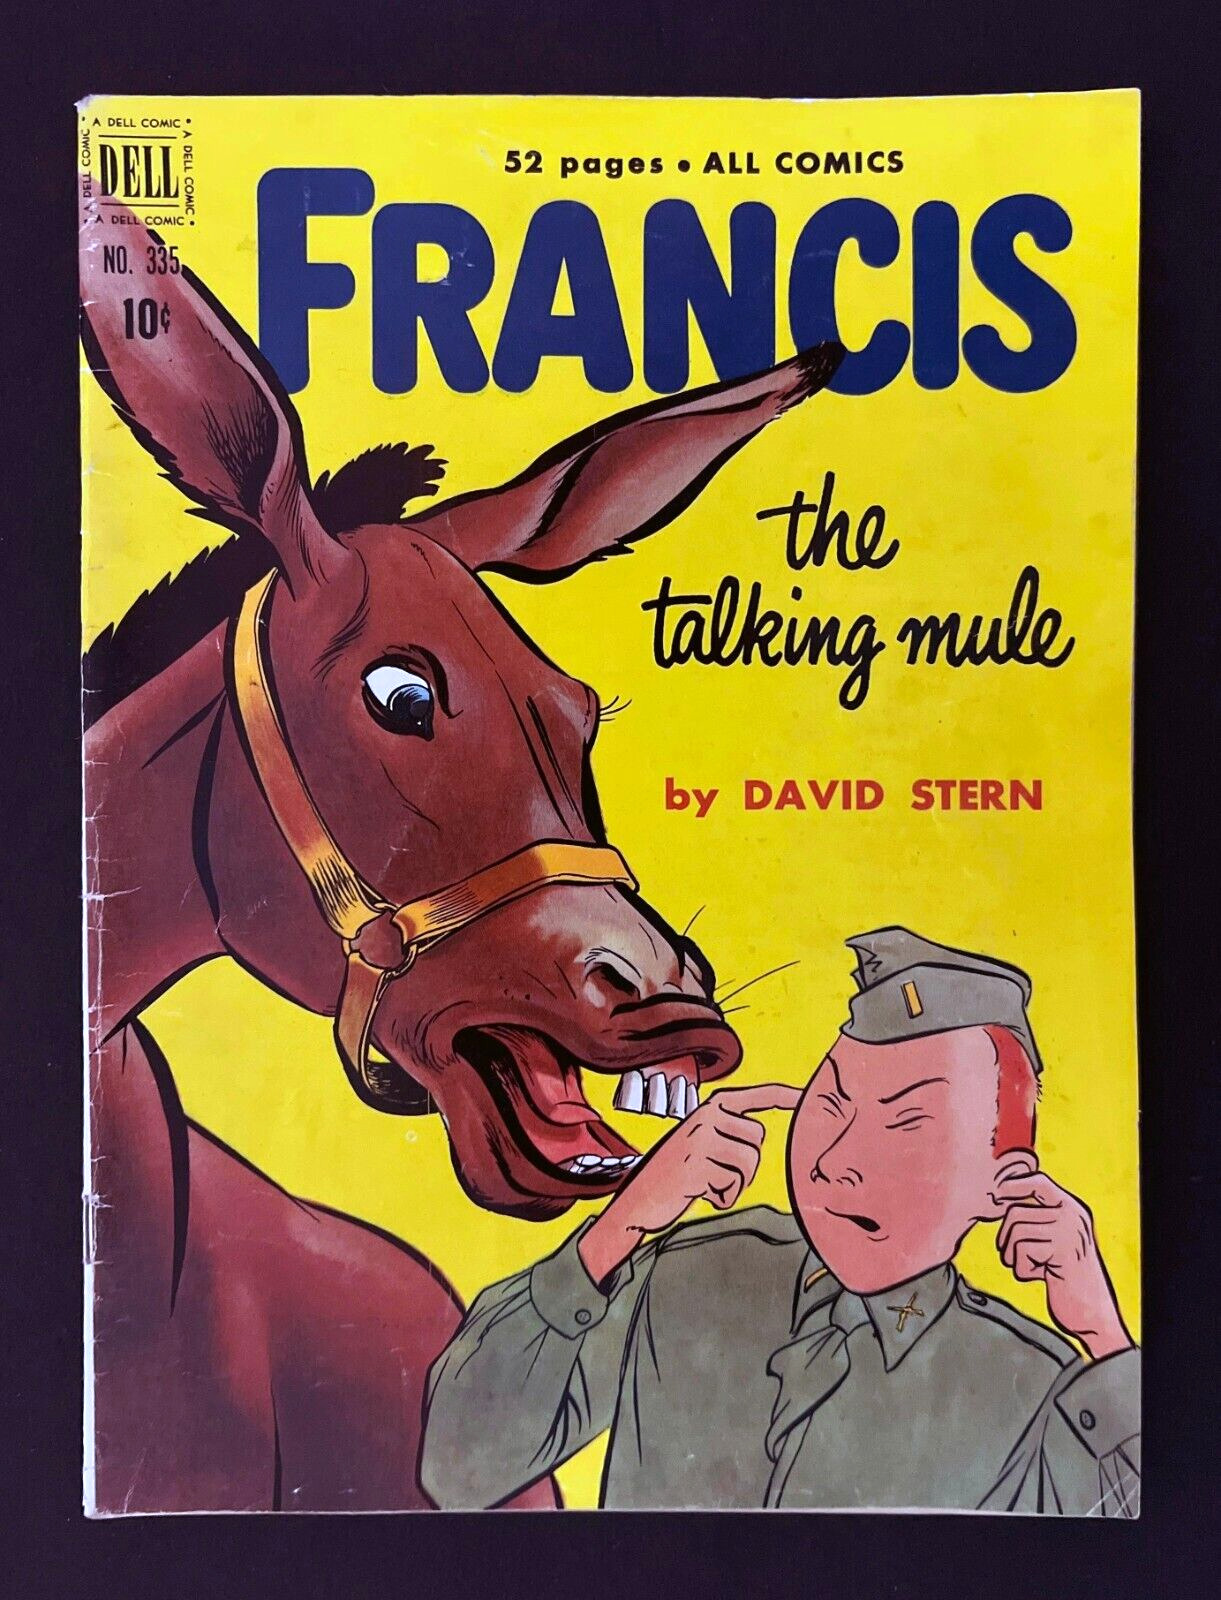 FRANCIS THE FAMOUS TALKING MULE #1 1951 Nice Copy Dell Four Color #335 1951